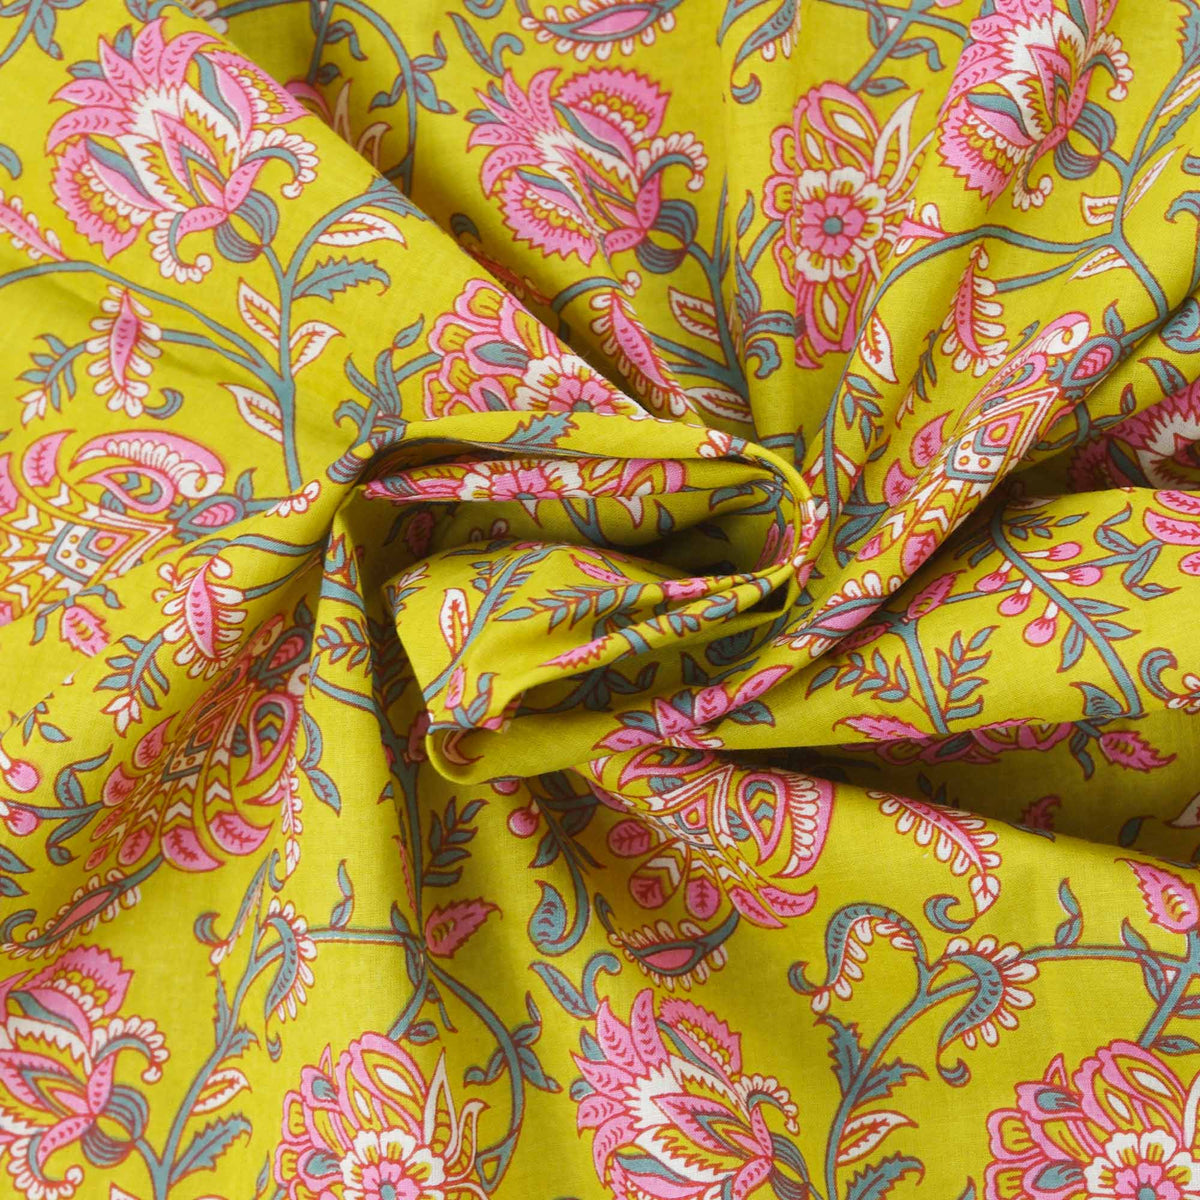 Hand Screen Printed 100% Cotton Fabric - Pink Carnation On Green (Design 377)